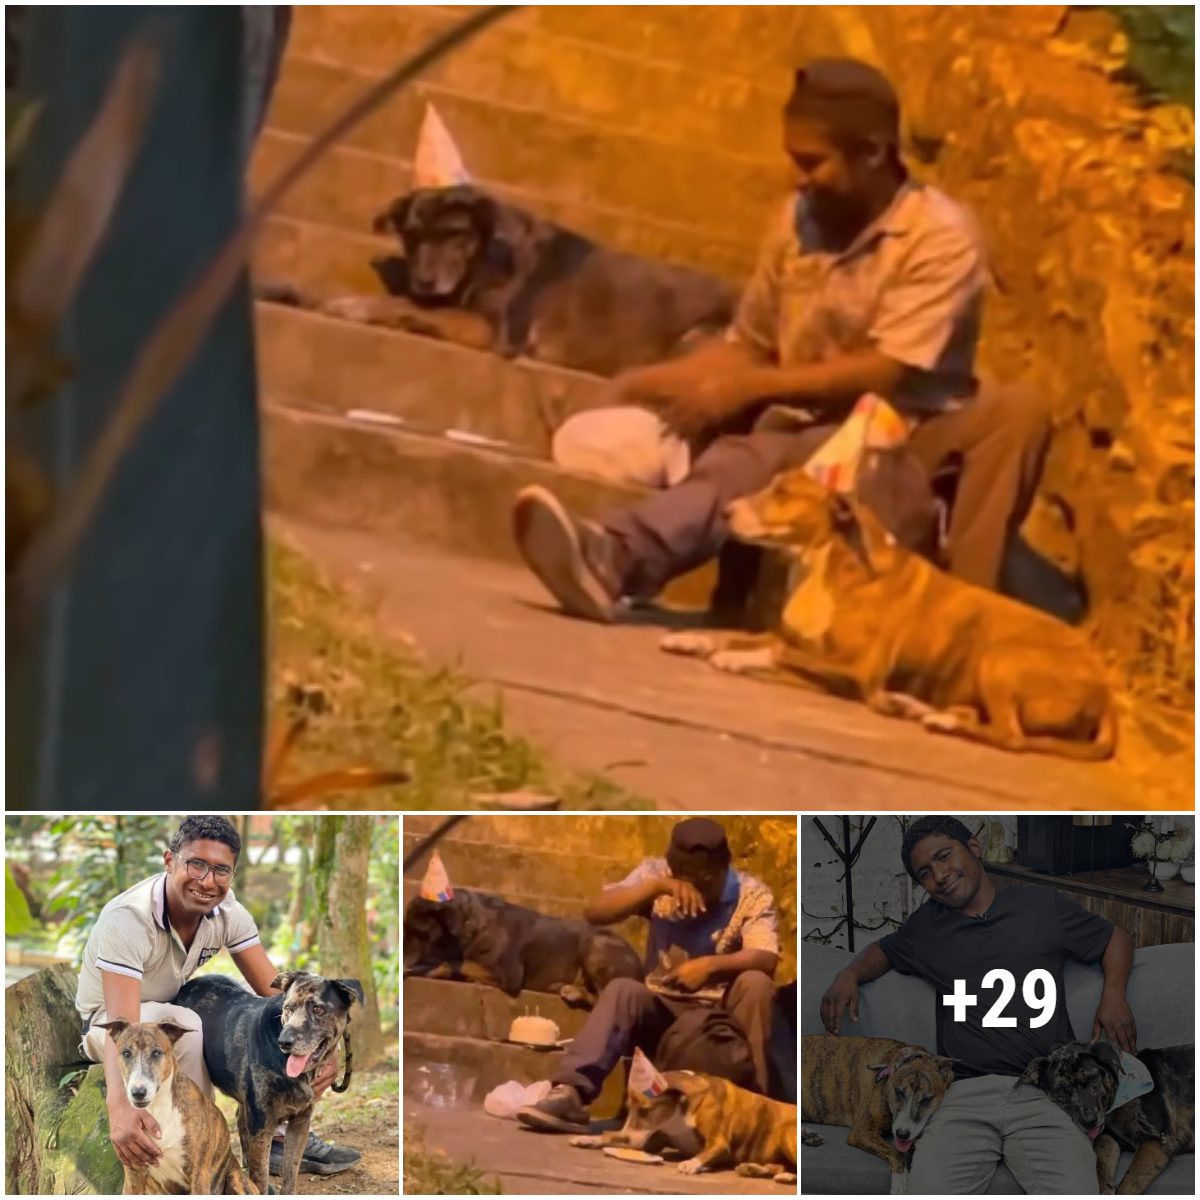 A touching scene as this homeless man celebrates his dog’s birthday in the most wonderful way